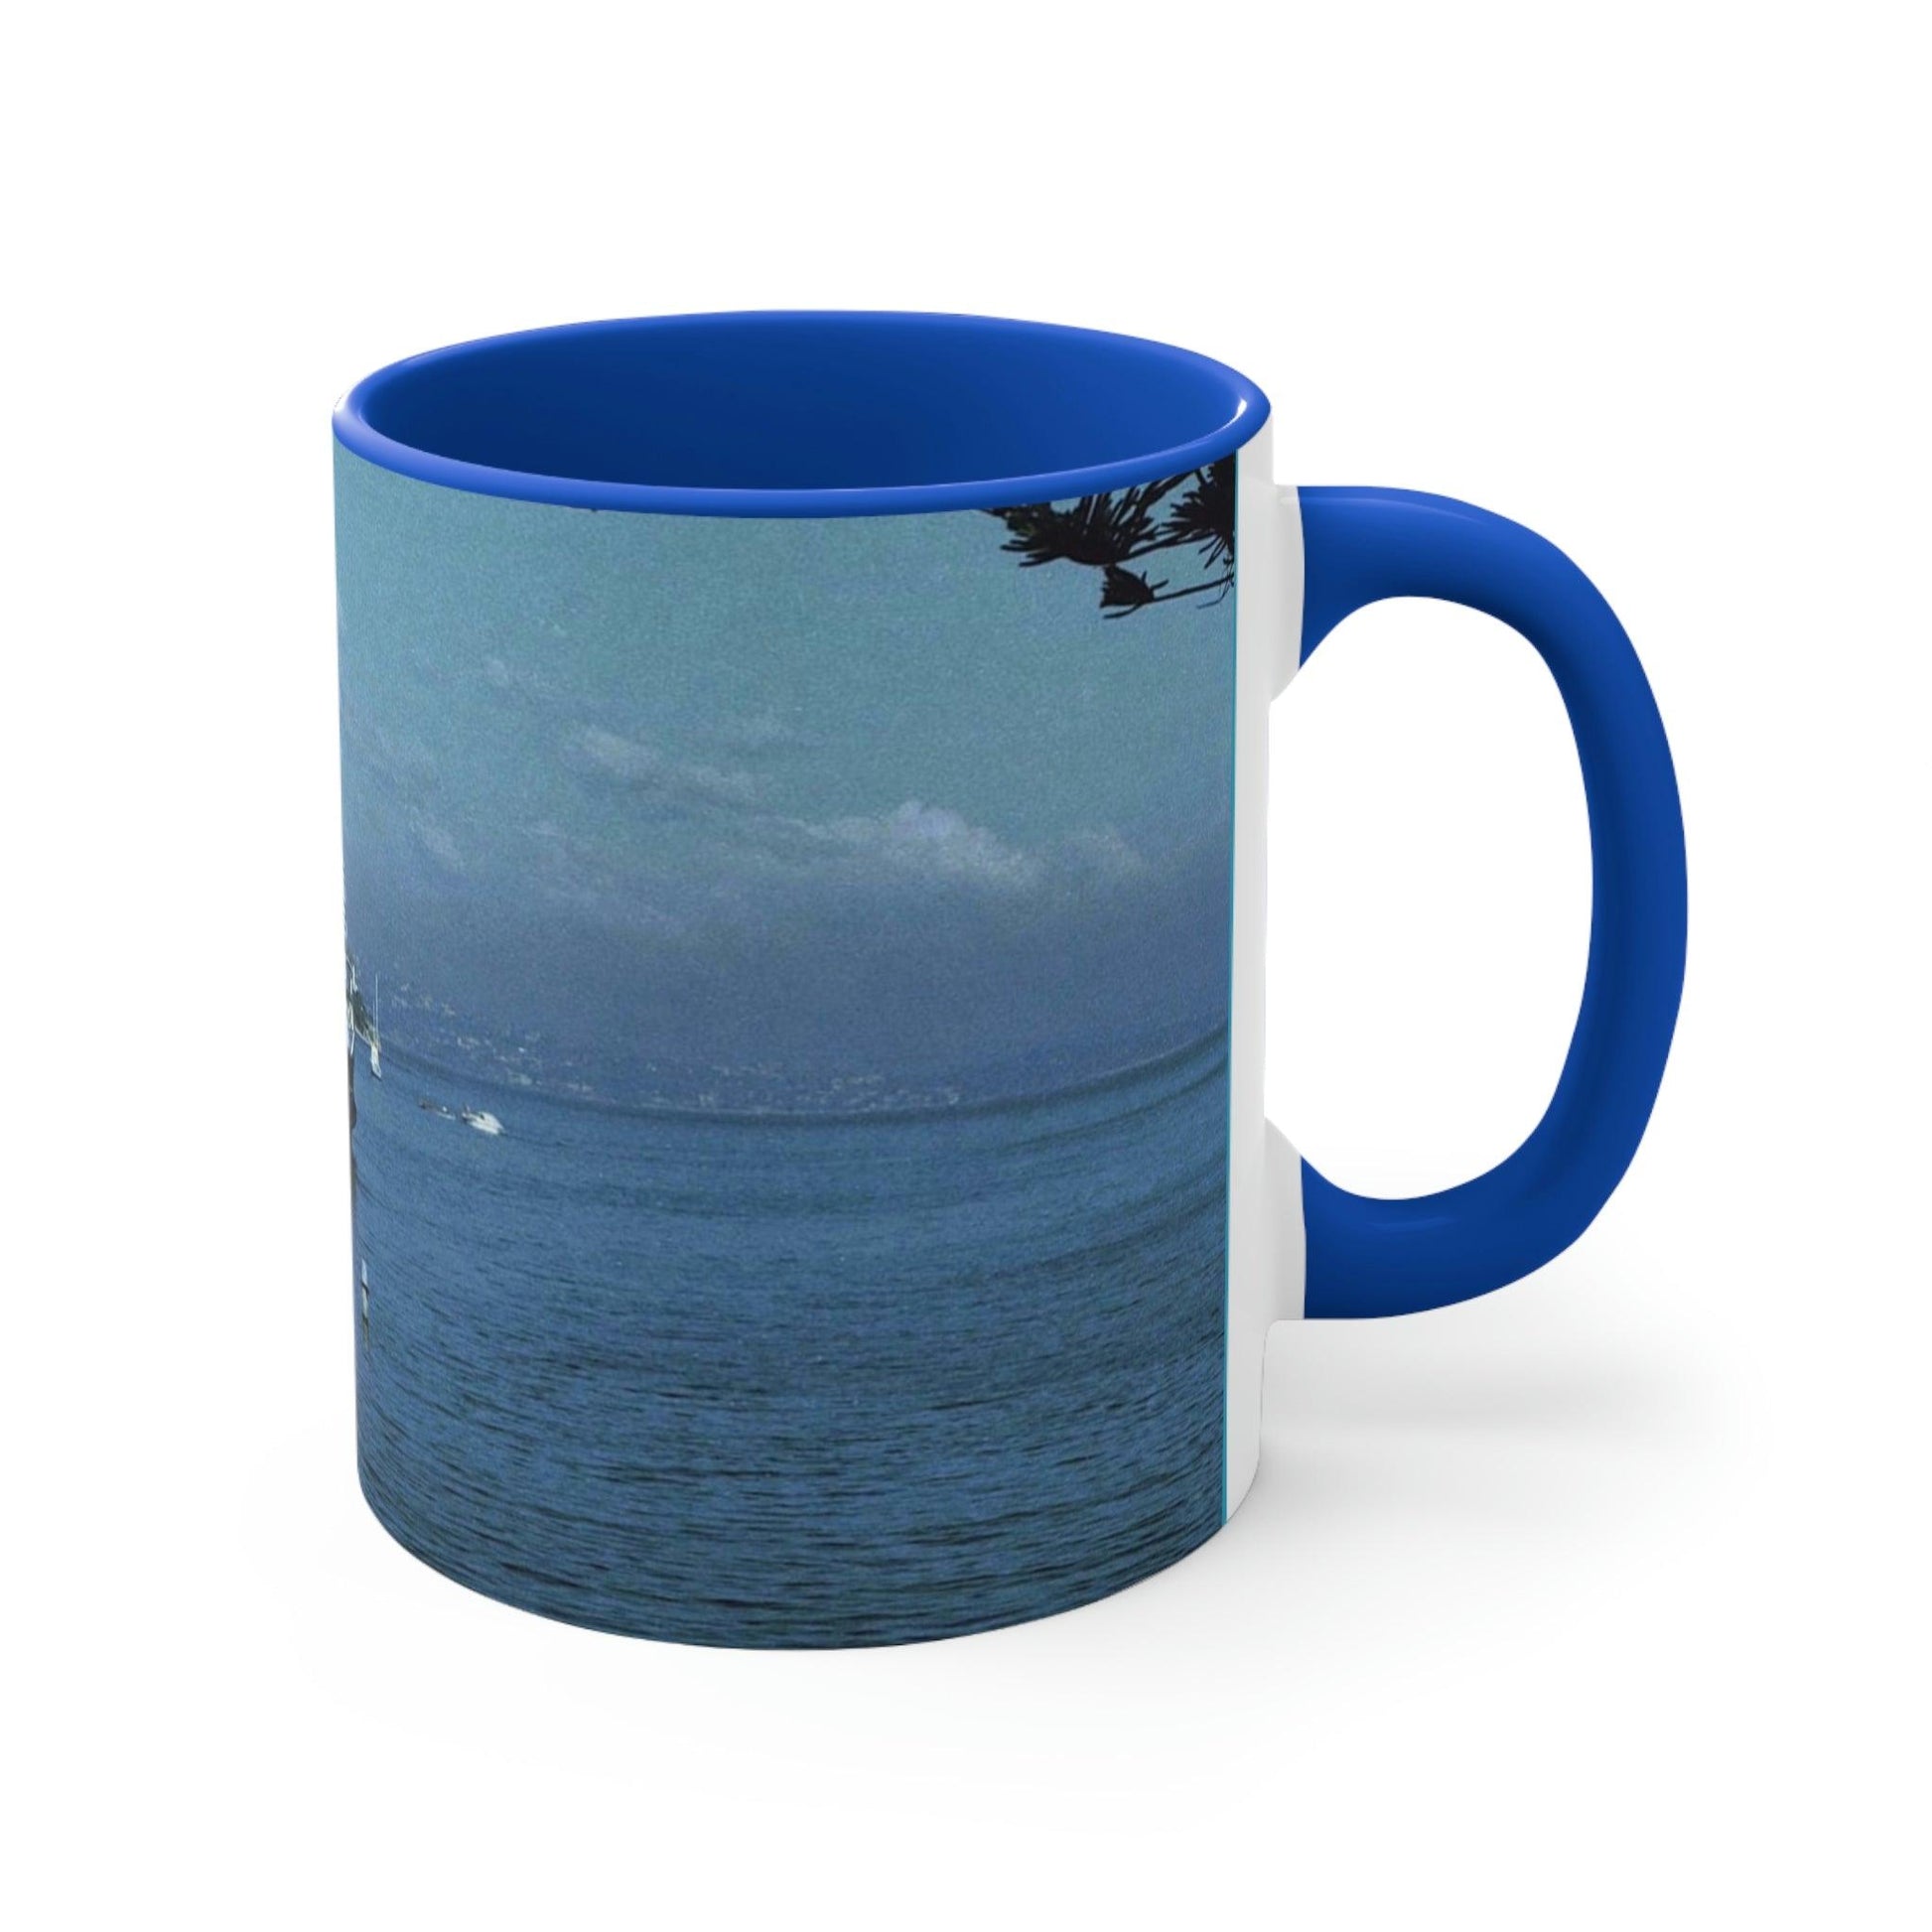 Colourful Accent Mug SS NORTH HEAD Ferry photo by Geoff Eastwood - Lost Manly Shop